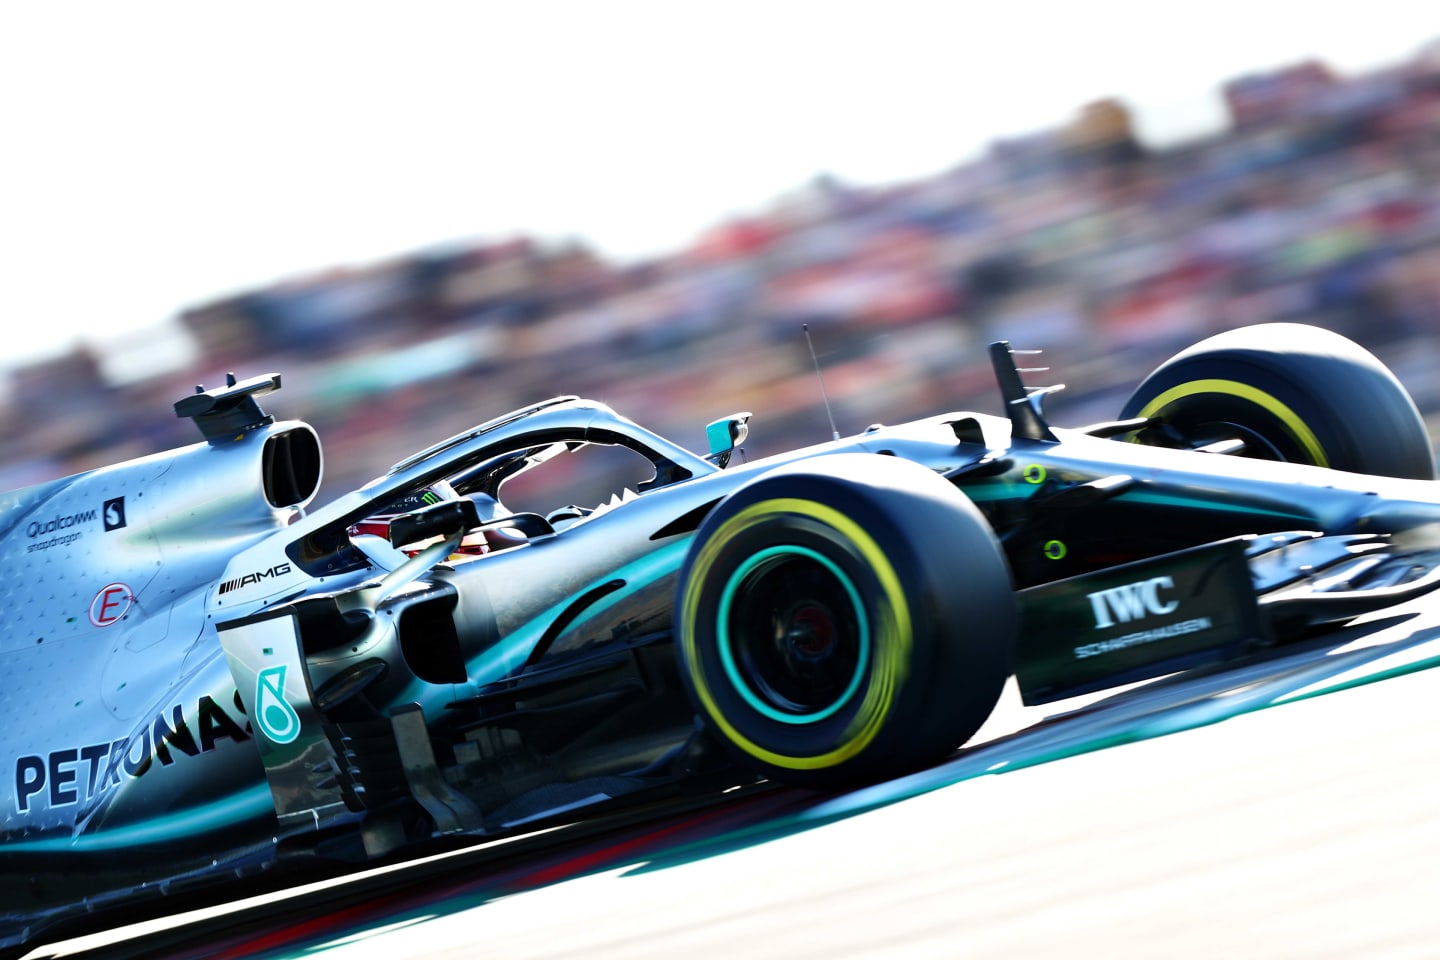 AUSTIN, TEXAS - NOVEMBER 02: Lewis Hamilton of Great Britain driving the (44) Mercedes AMG Petronas F1 Team Mercedes W10 on track during qualifying for the F1 Grand Prix of USA at Circuit of The Americas on November 02, 2019 in Austin, Texas. (Photo by Dan Istitene/Getty Images)